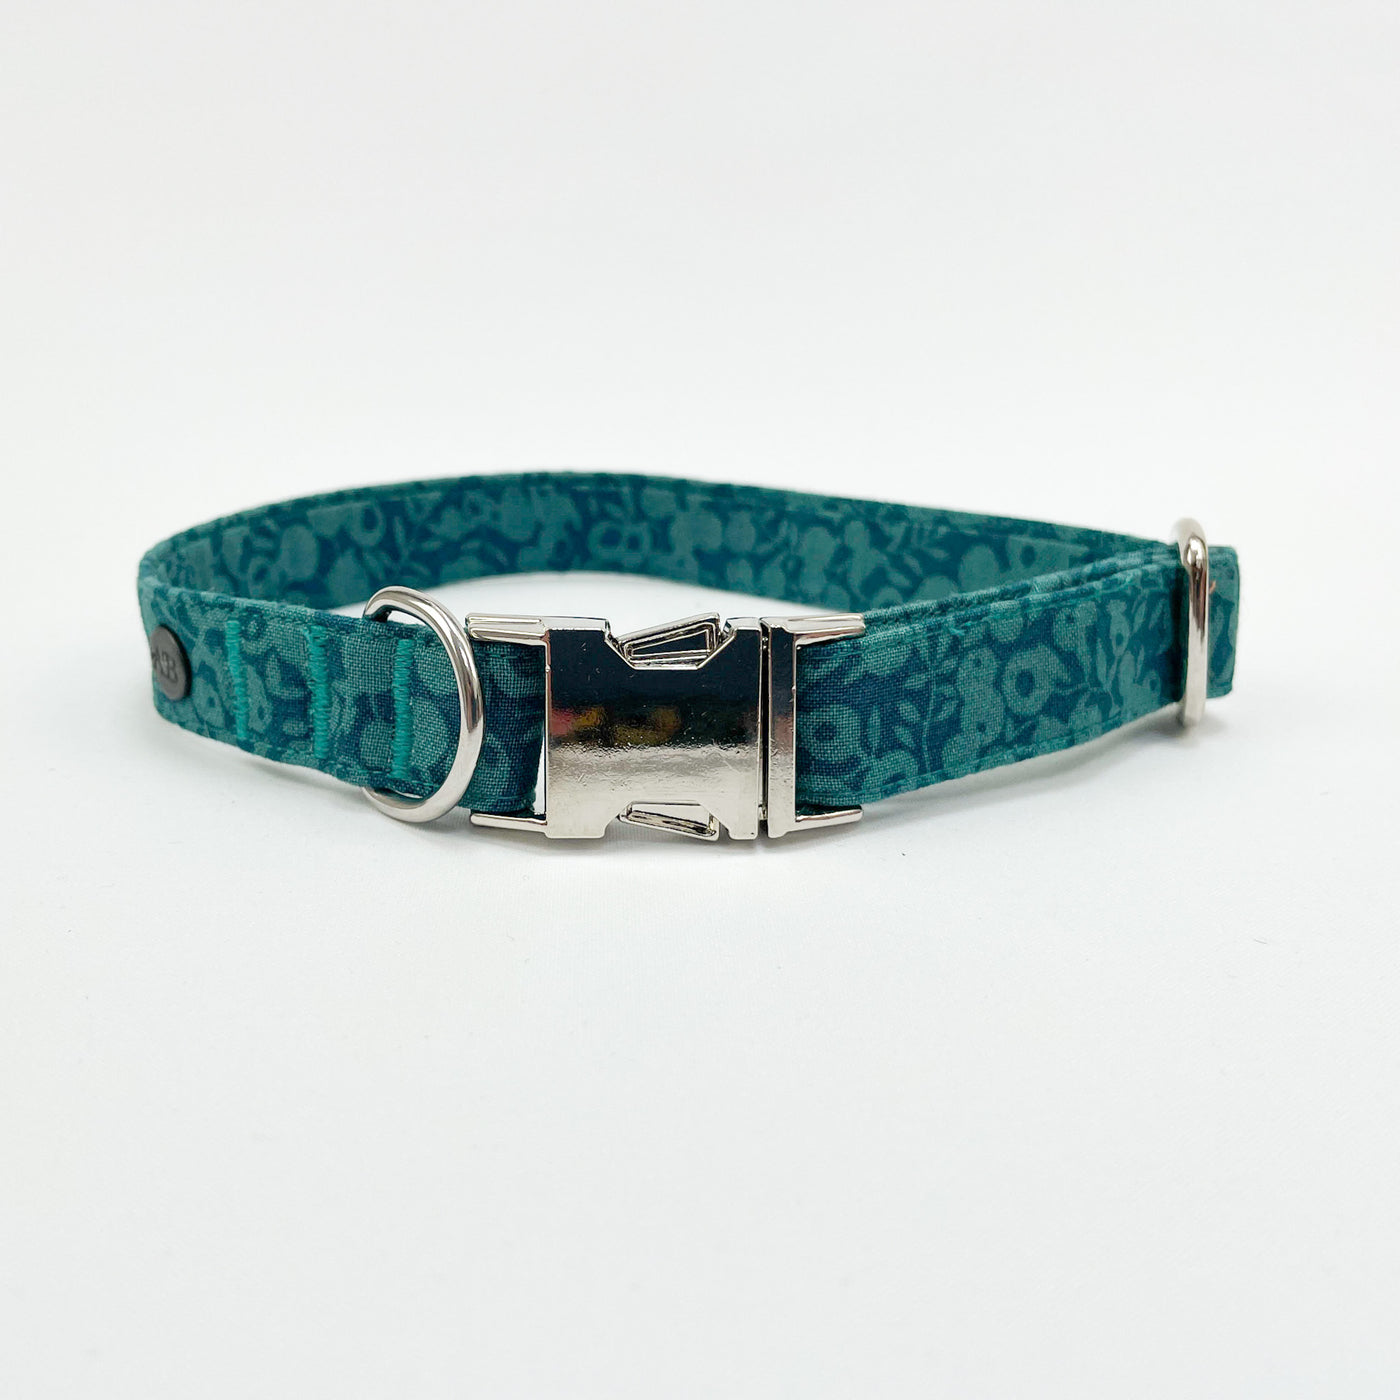 Liberty autumn emerald dog collar with a silver buckle